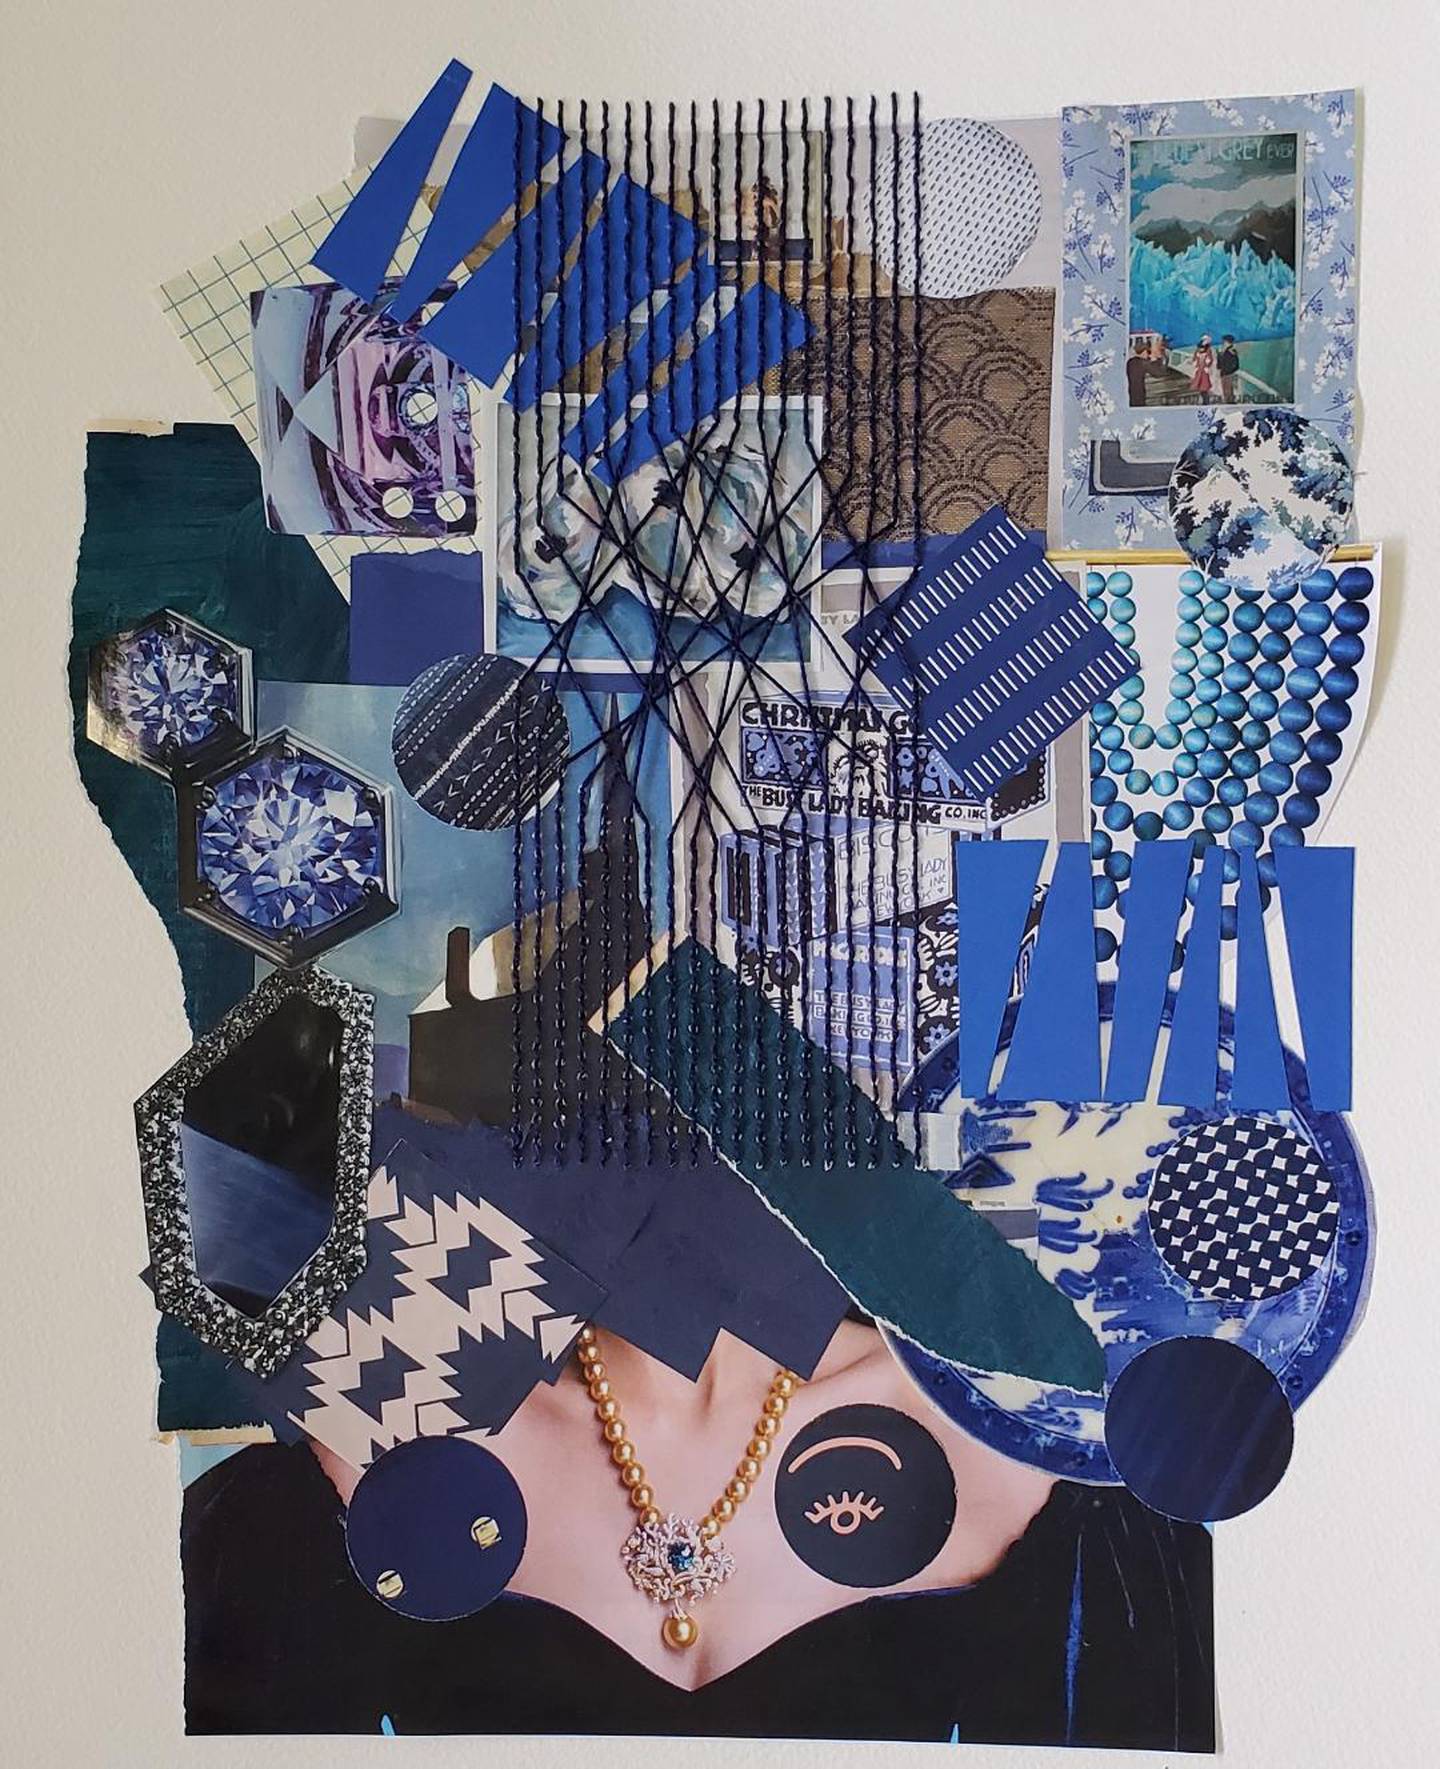 Indigo Work by Laura O'Connor (collage & embroidery)